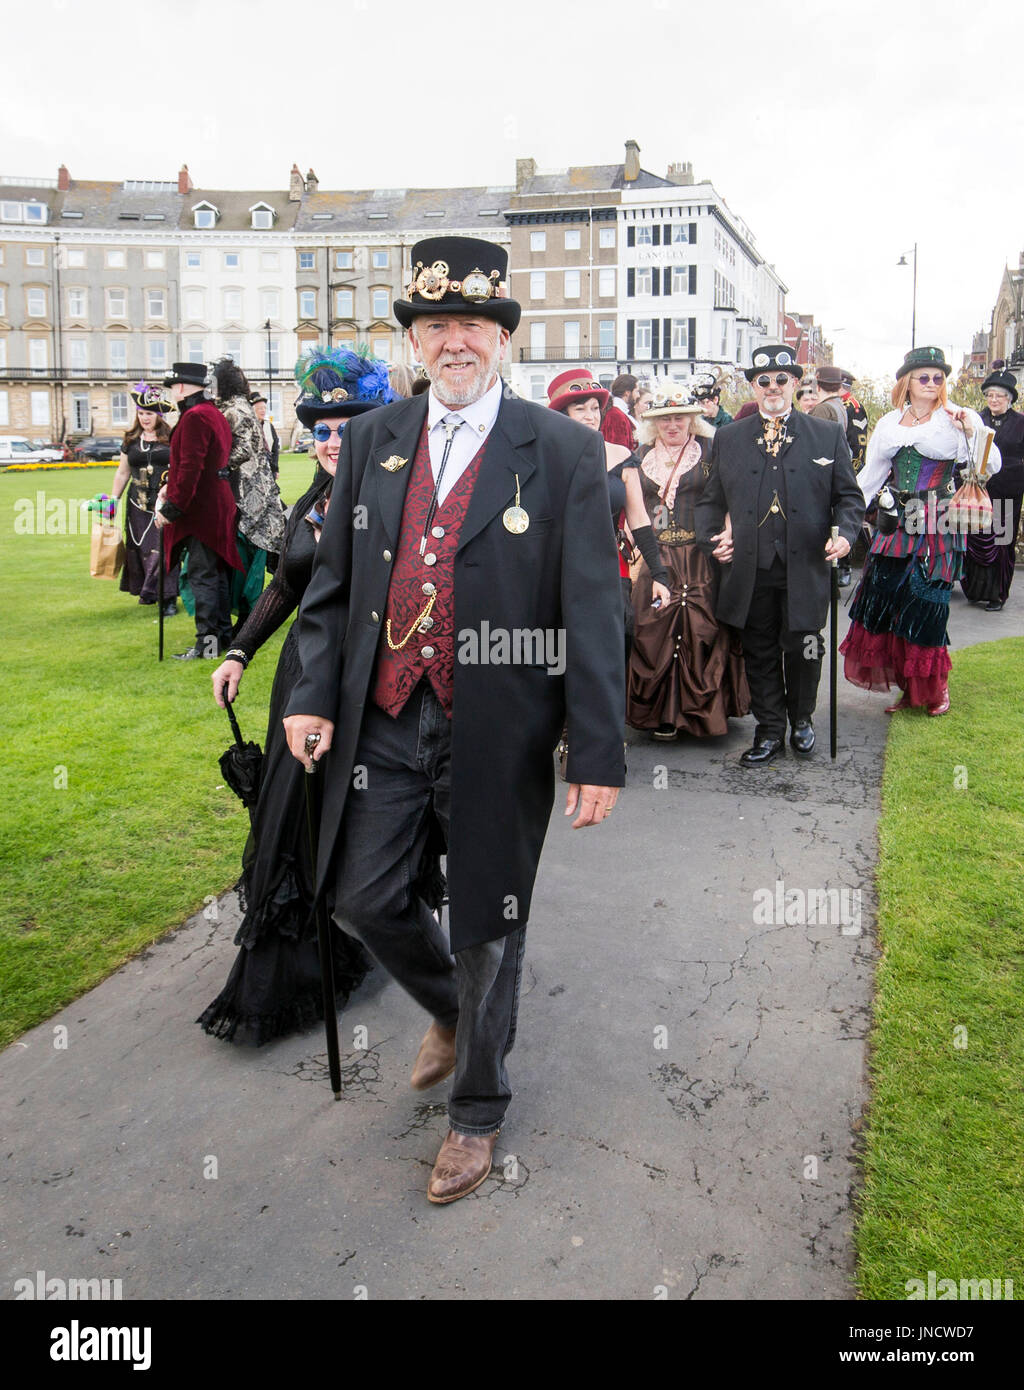 People in costume attend the Whitby Steampunk Weekend in Whitby, Yorkshire. Stock Photo